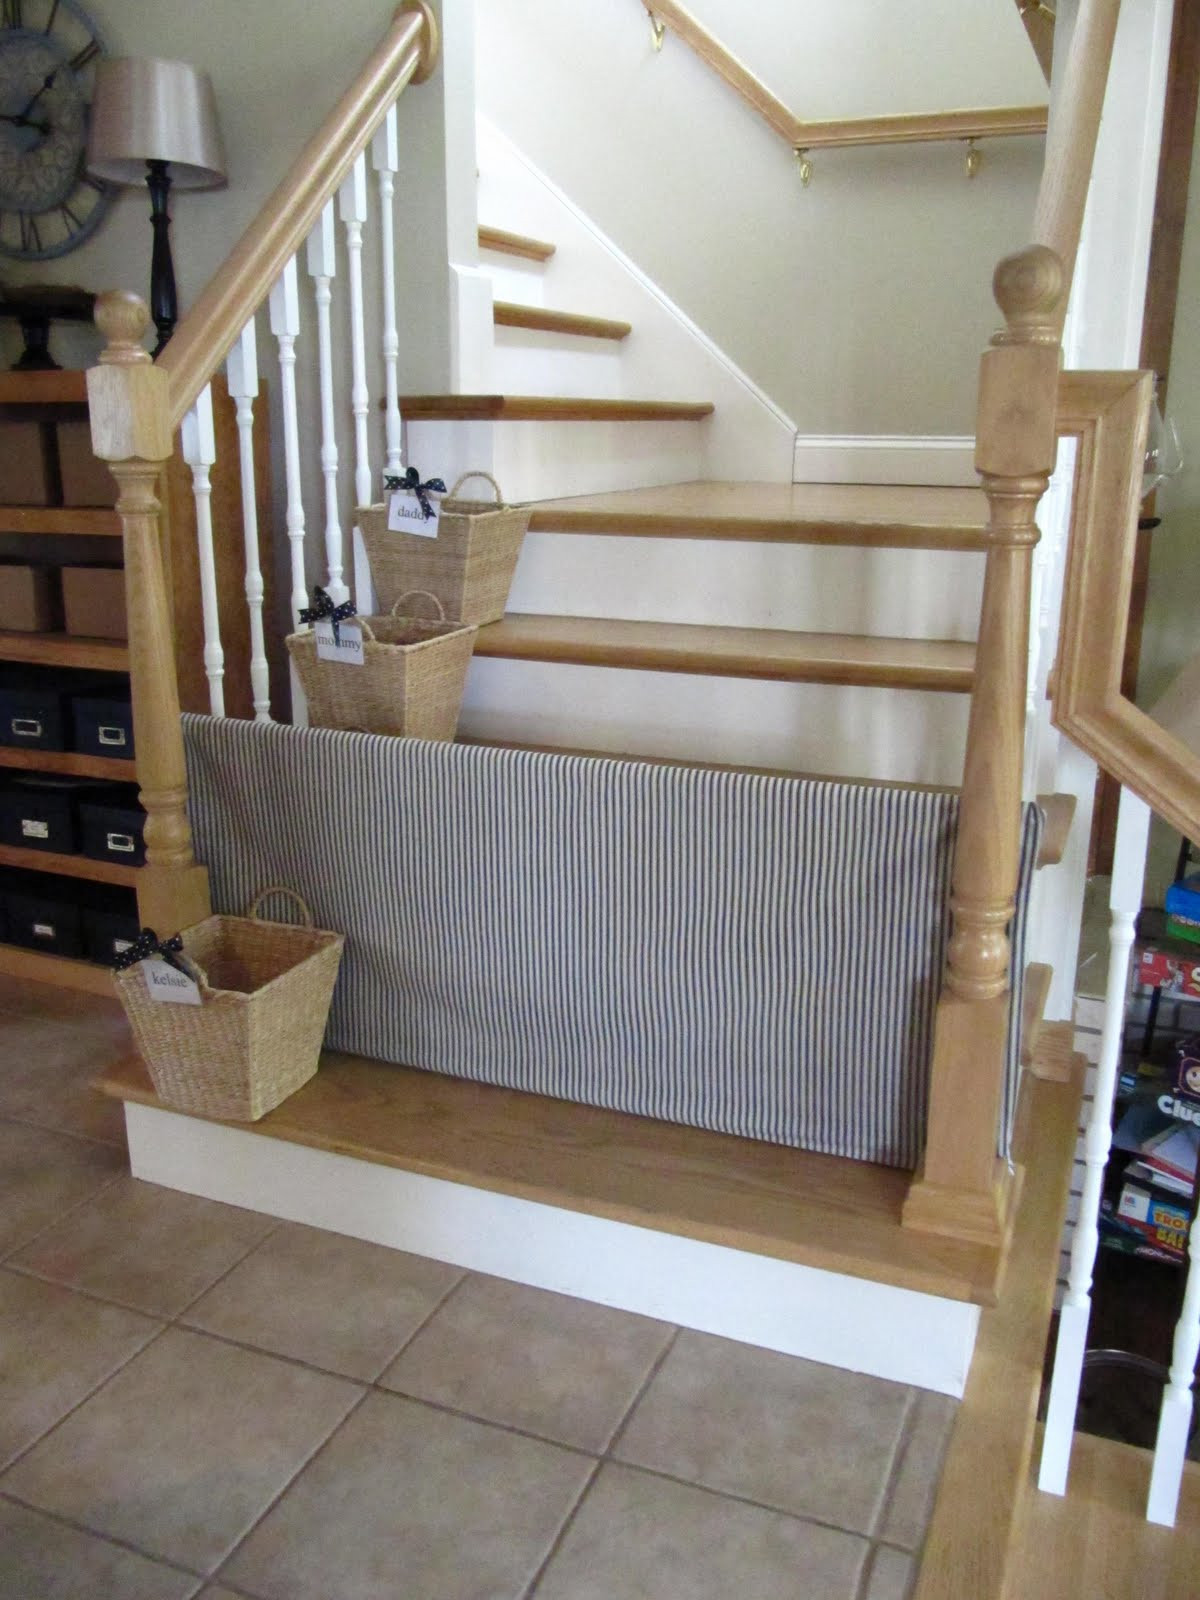 DIY Baby Gate Stairs
 10 DIY Baby Gates for Stairs